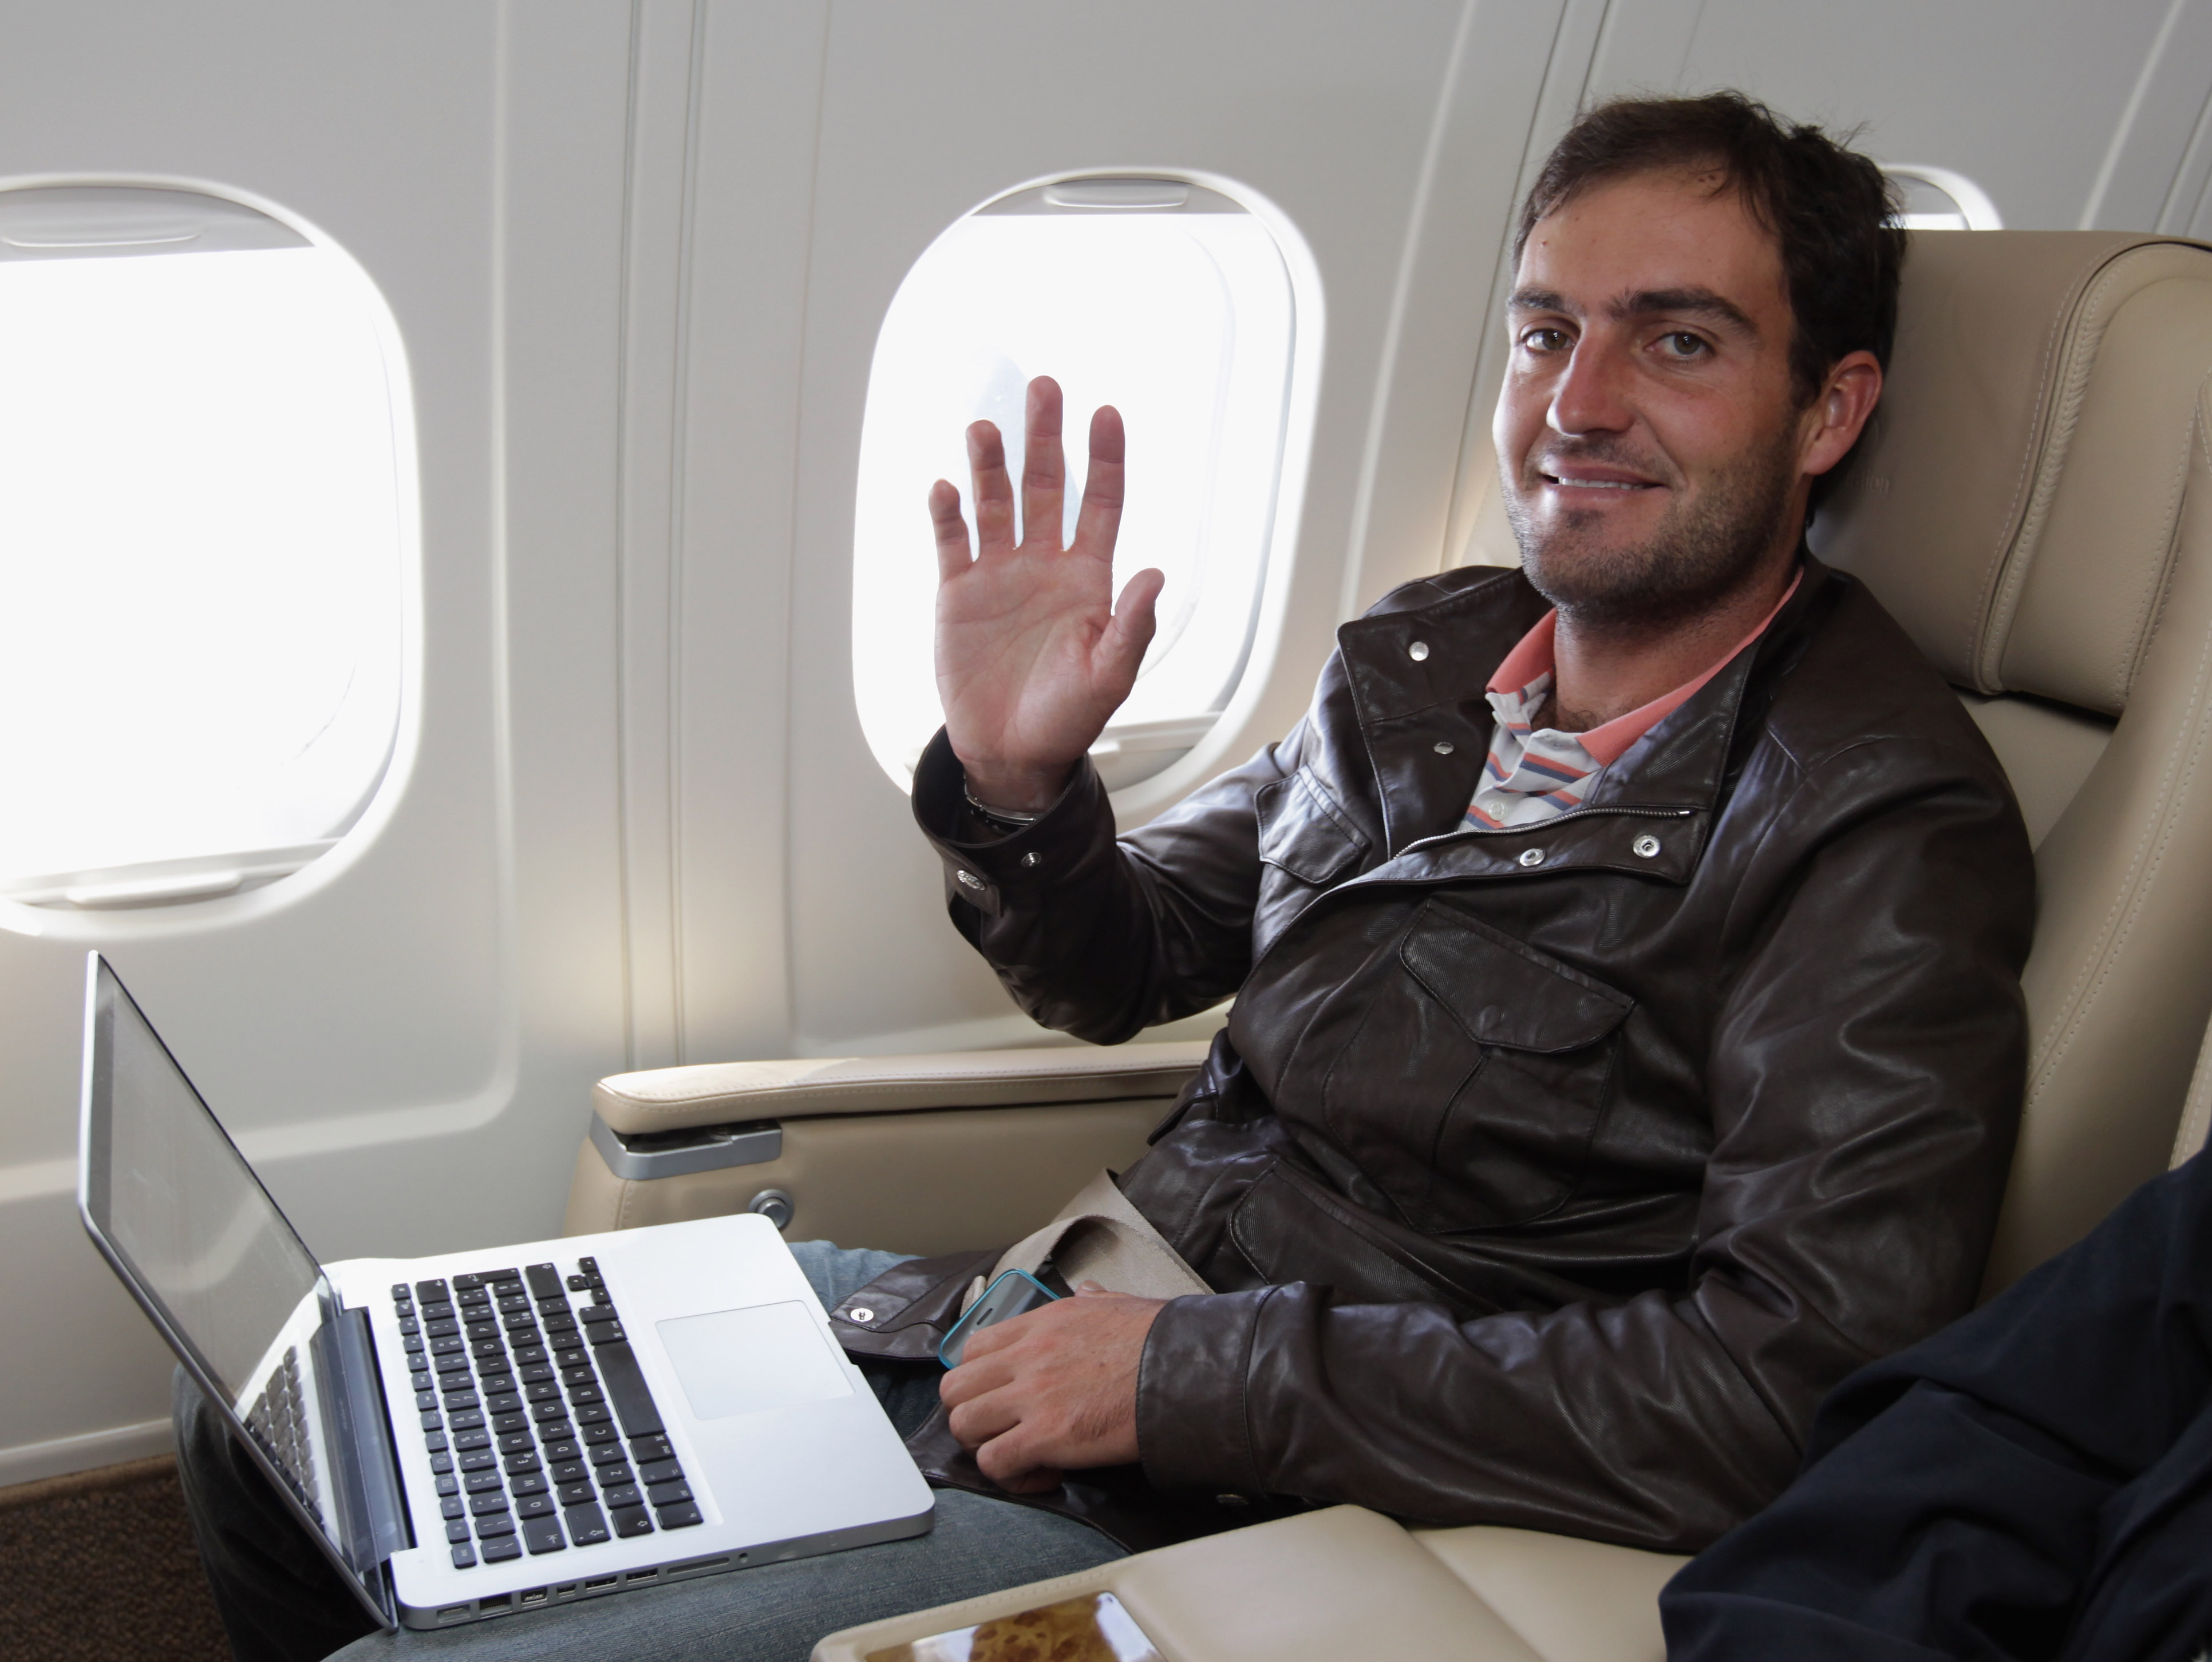 CARDIFF, UNITED KINGDOM - OCTOBER 05:  Edoardo Molinari of Italy works on his computer in a private jet as he flies from Cardiff airport on October 5, 2010 in Cardiff, United Kingdom. Molinari was a member of the winning European team at The Ryder Cup and